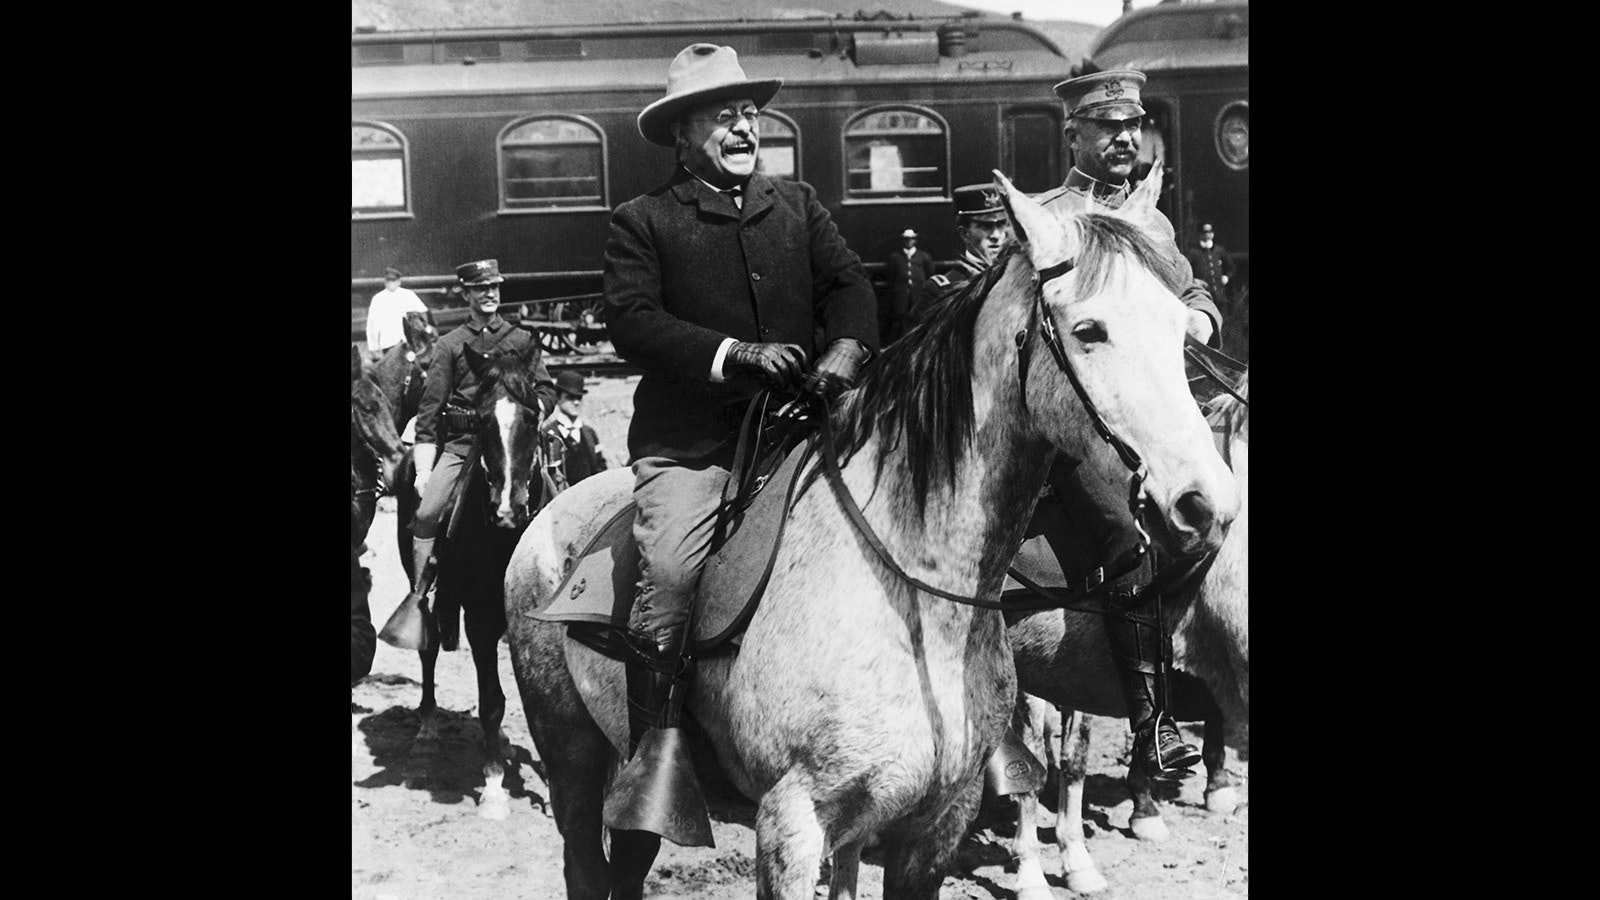 Teddy Roosevelt on horseback during a visit to Yellowstone National Park.